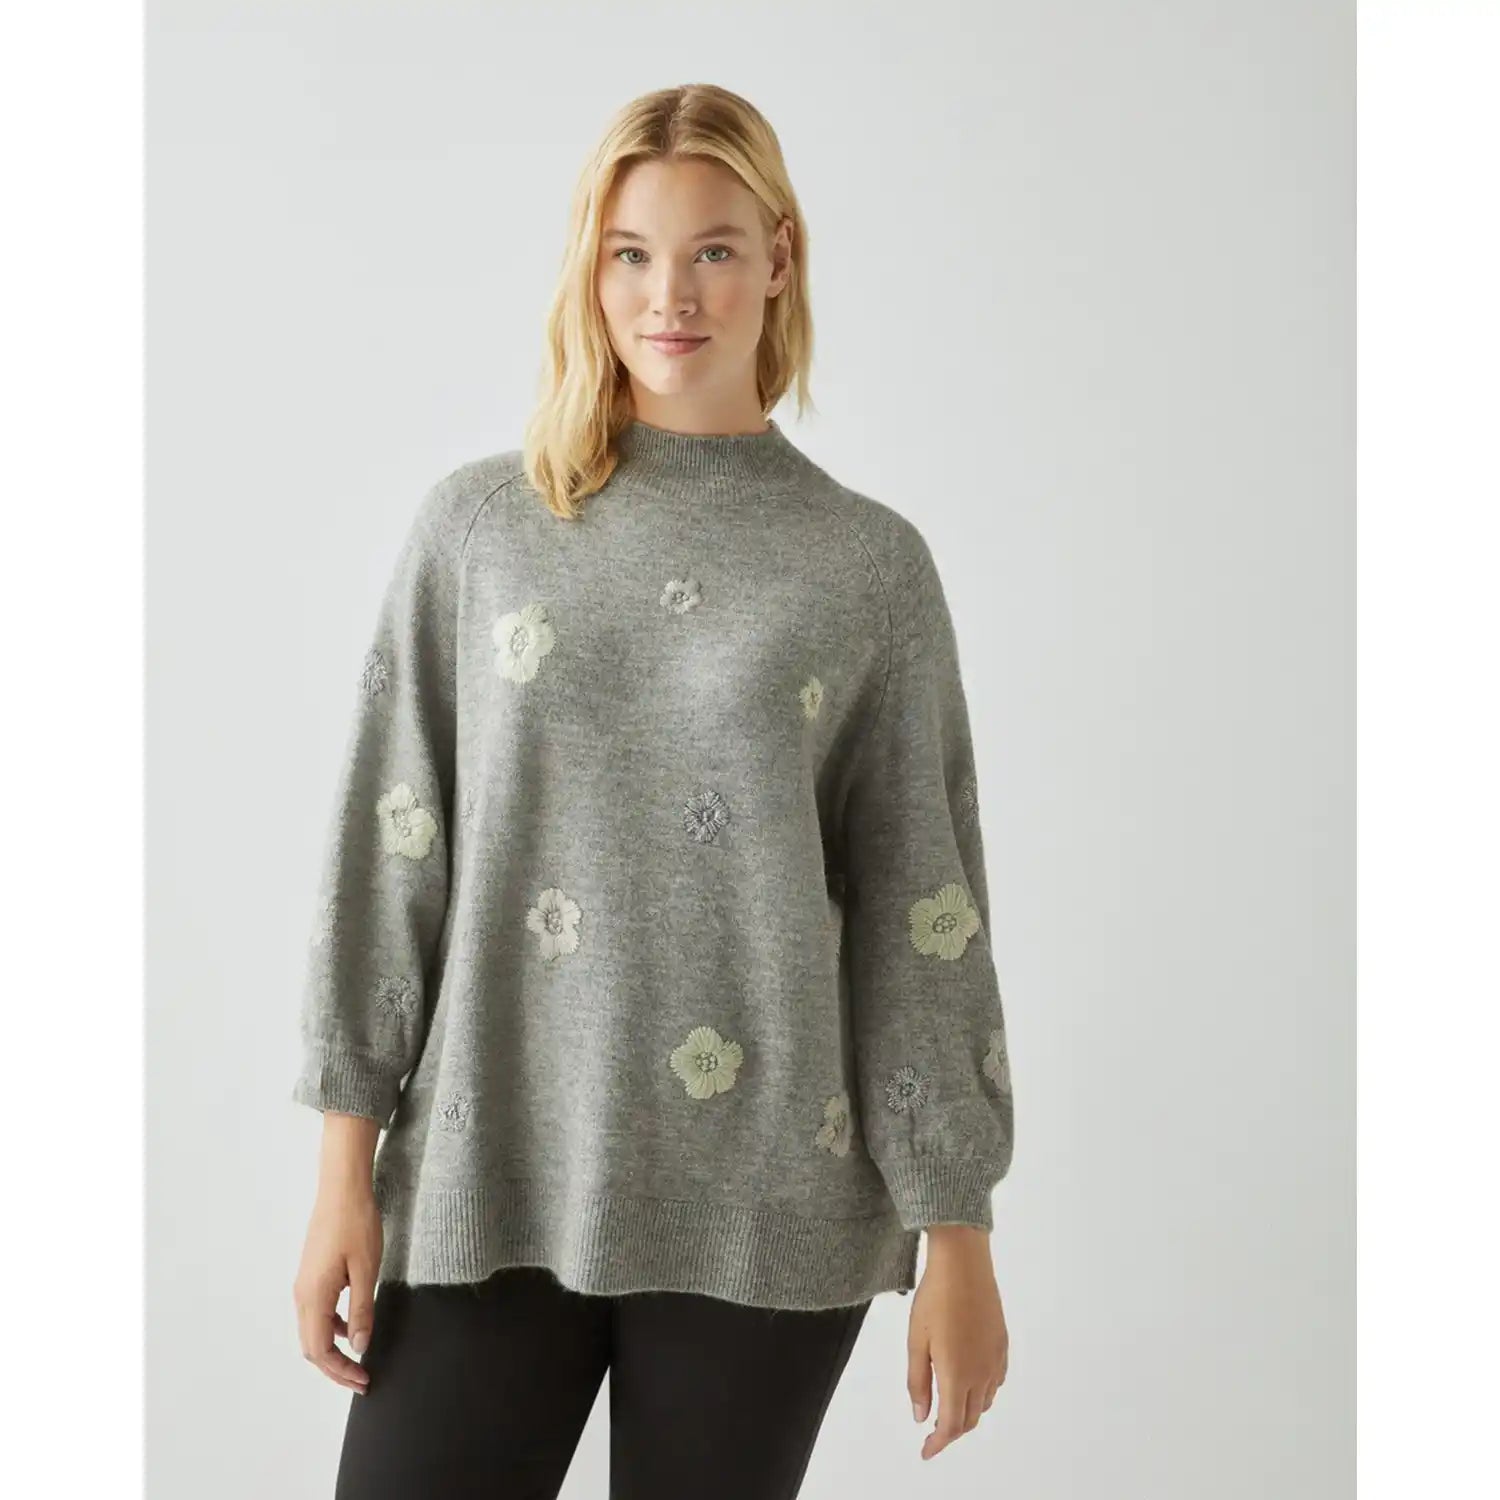 Couchel Knitted Sweater With Embroidery - Light Grey 2 Shaws Department Stores